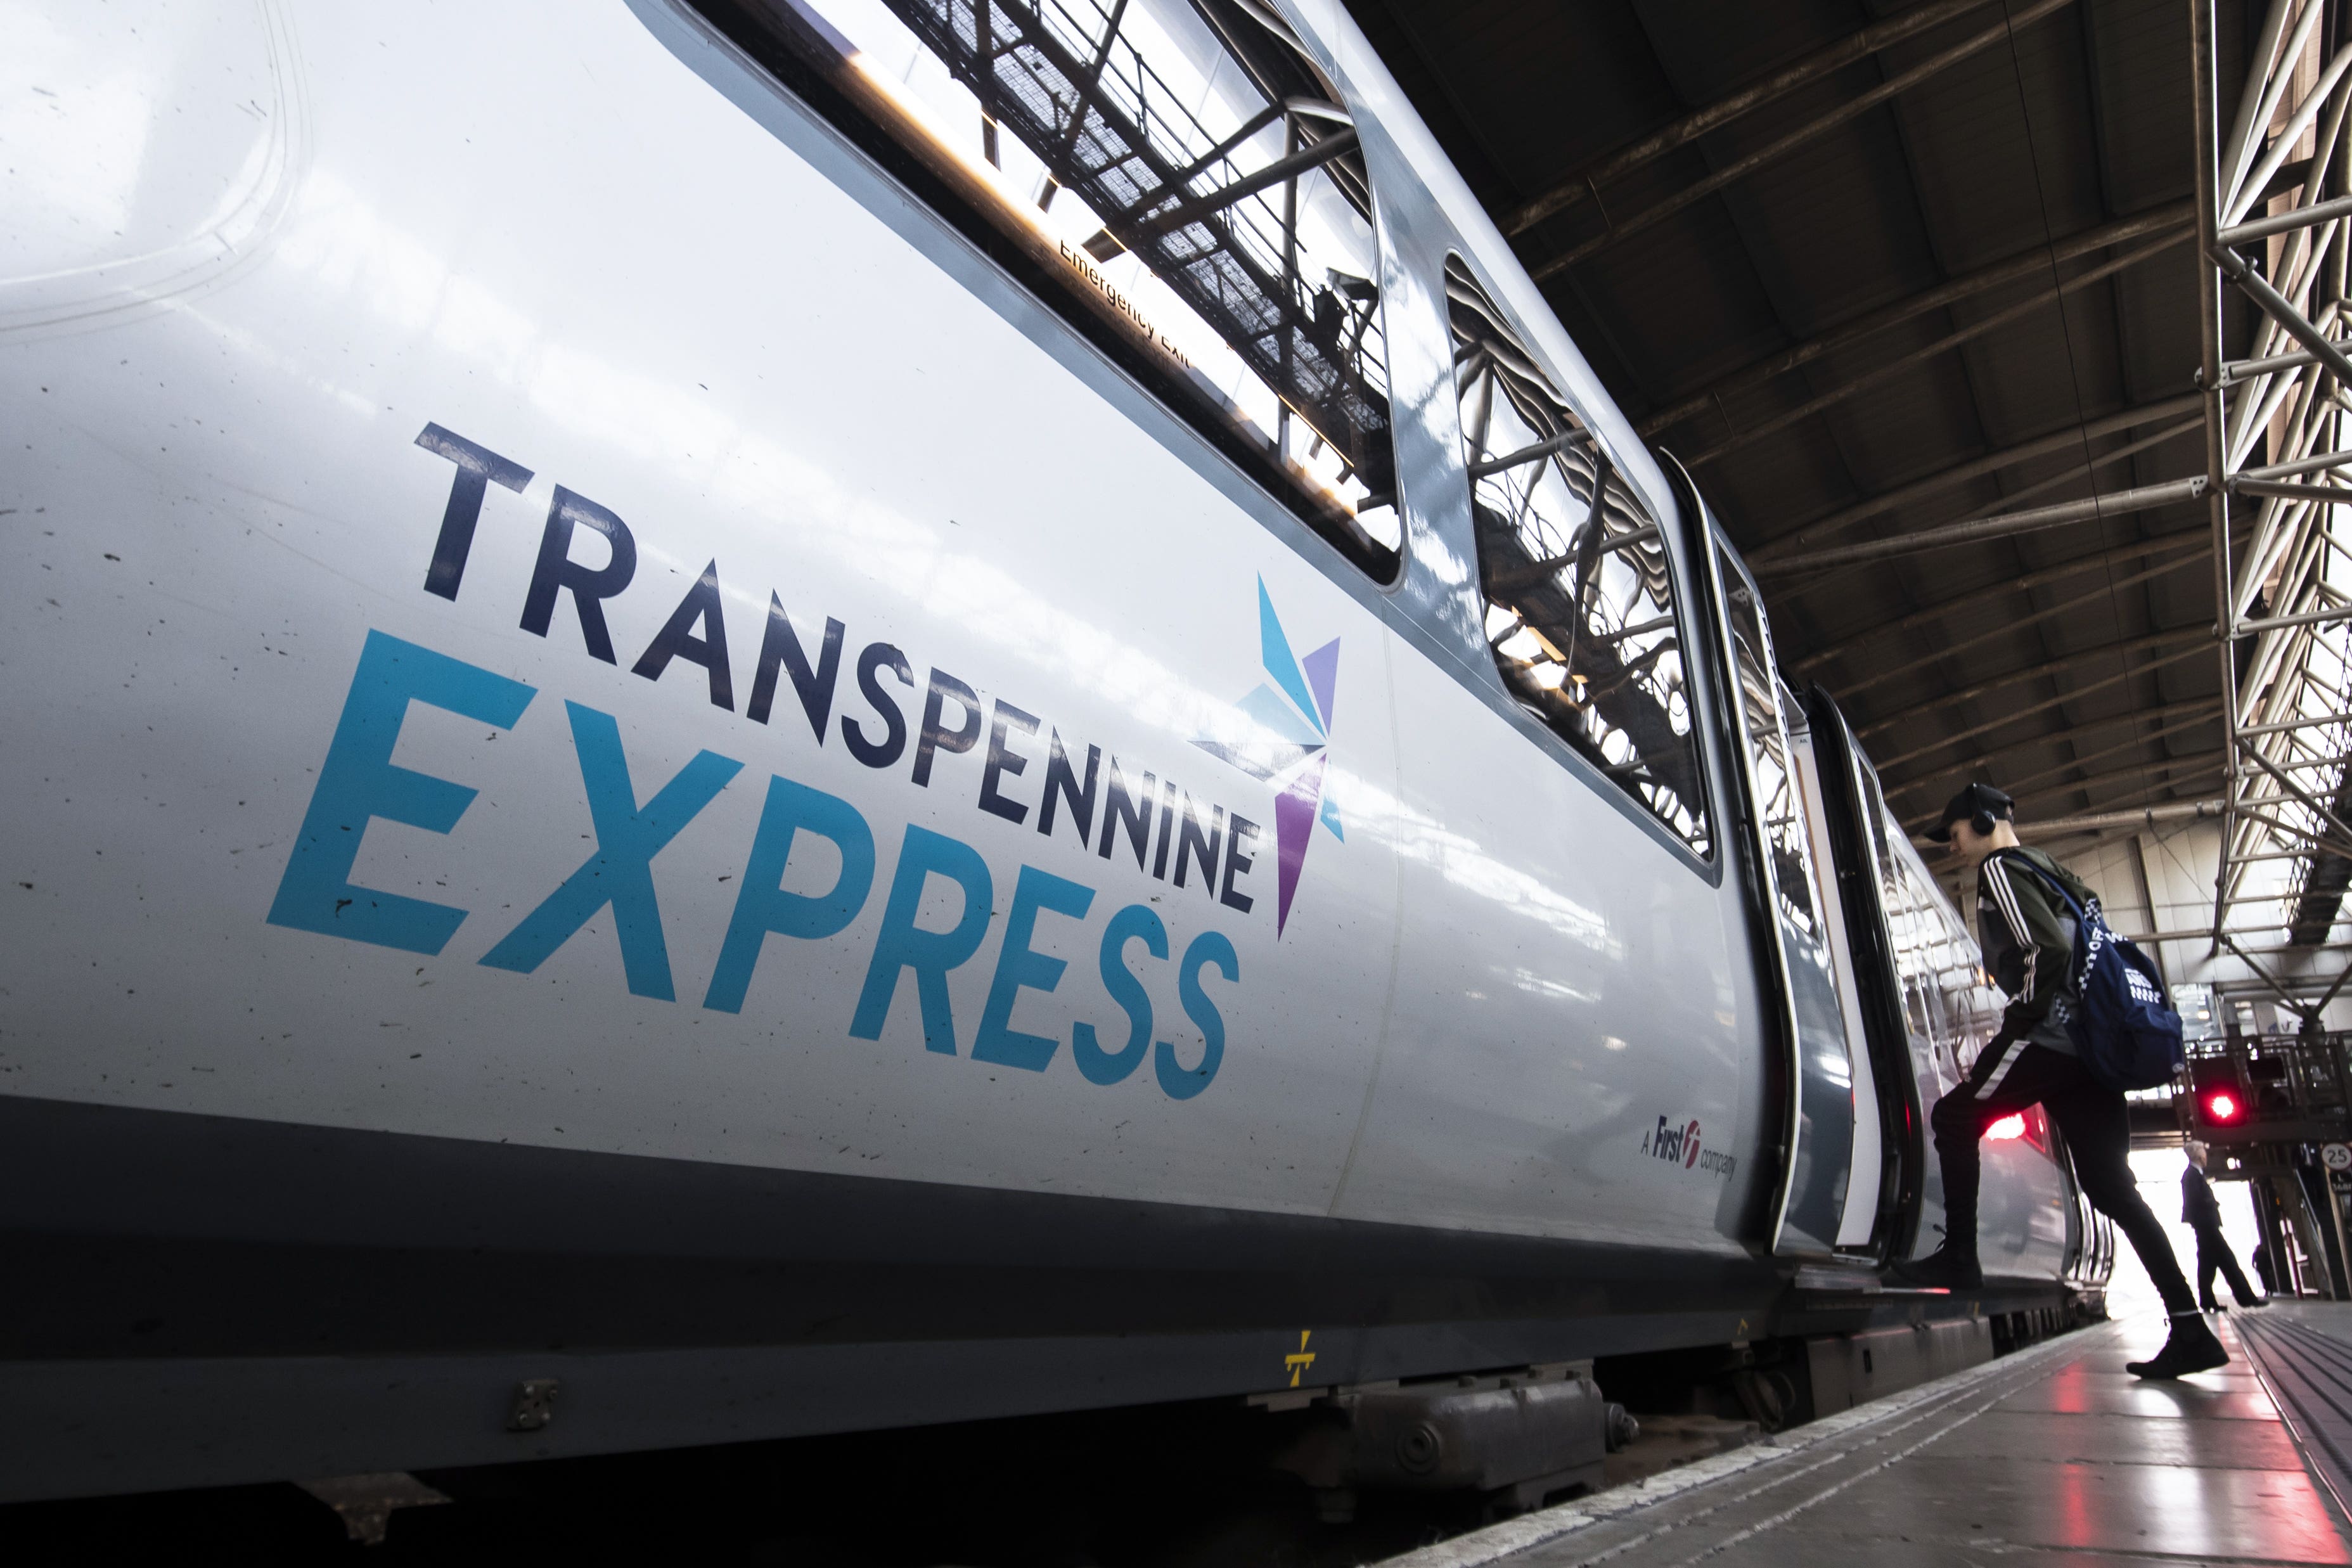 Ministers intend for TransPennine Express to be returned to the private sector following the decision to nationalise it this week (Danny Lawson/PA)